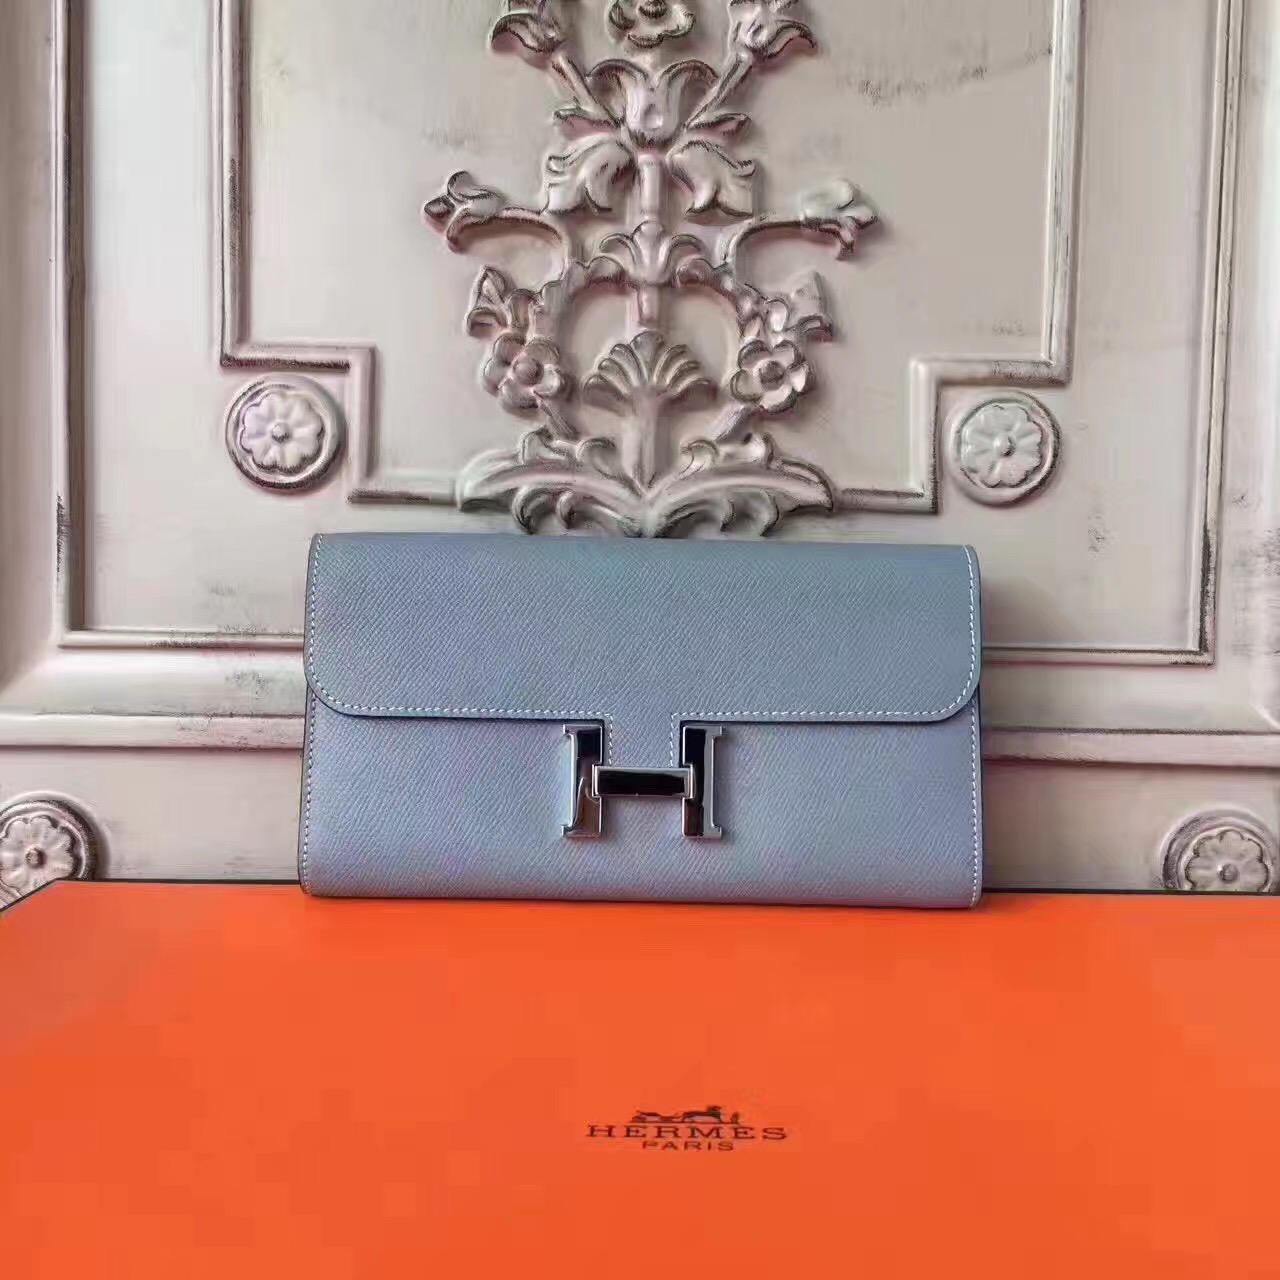 Hermes large Constance leather gray top wallet handbags